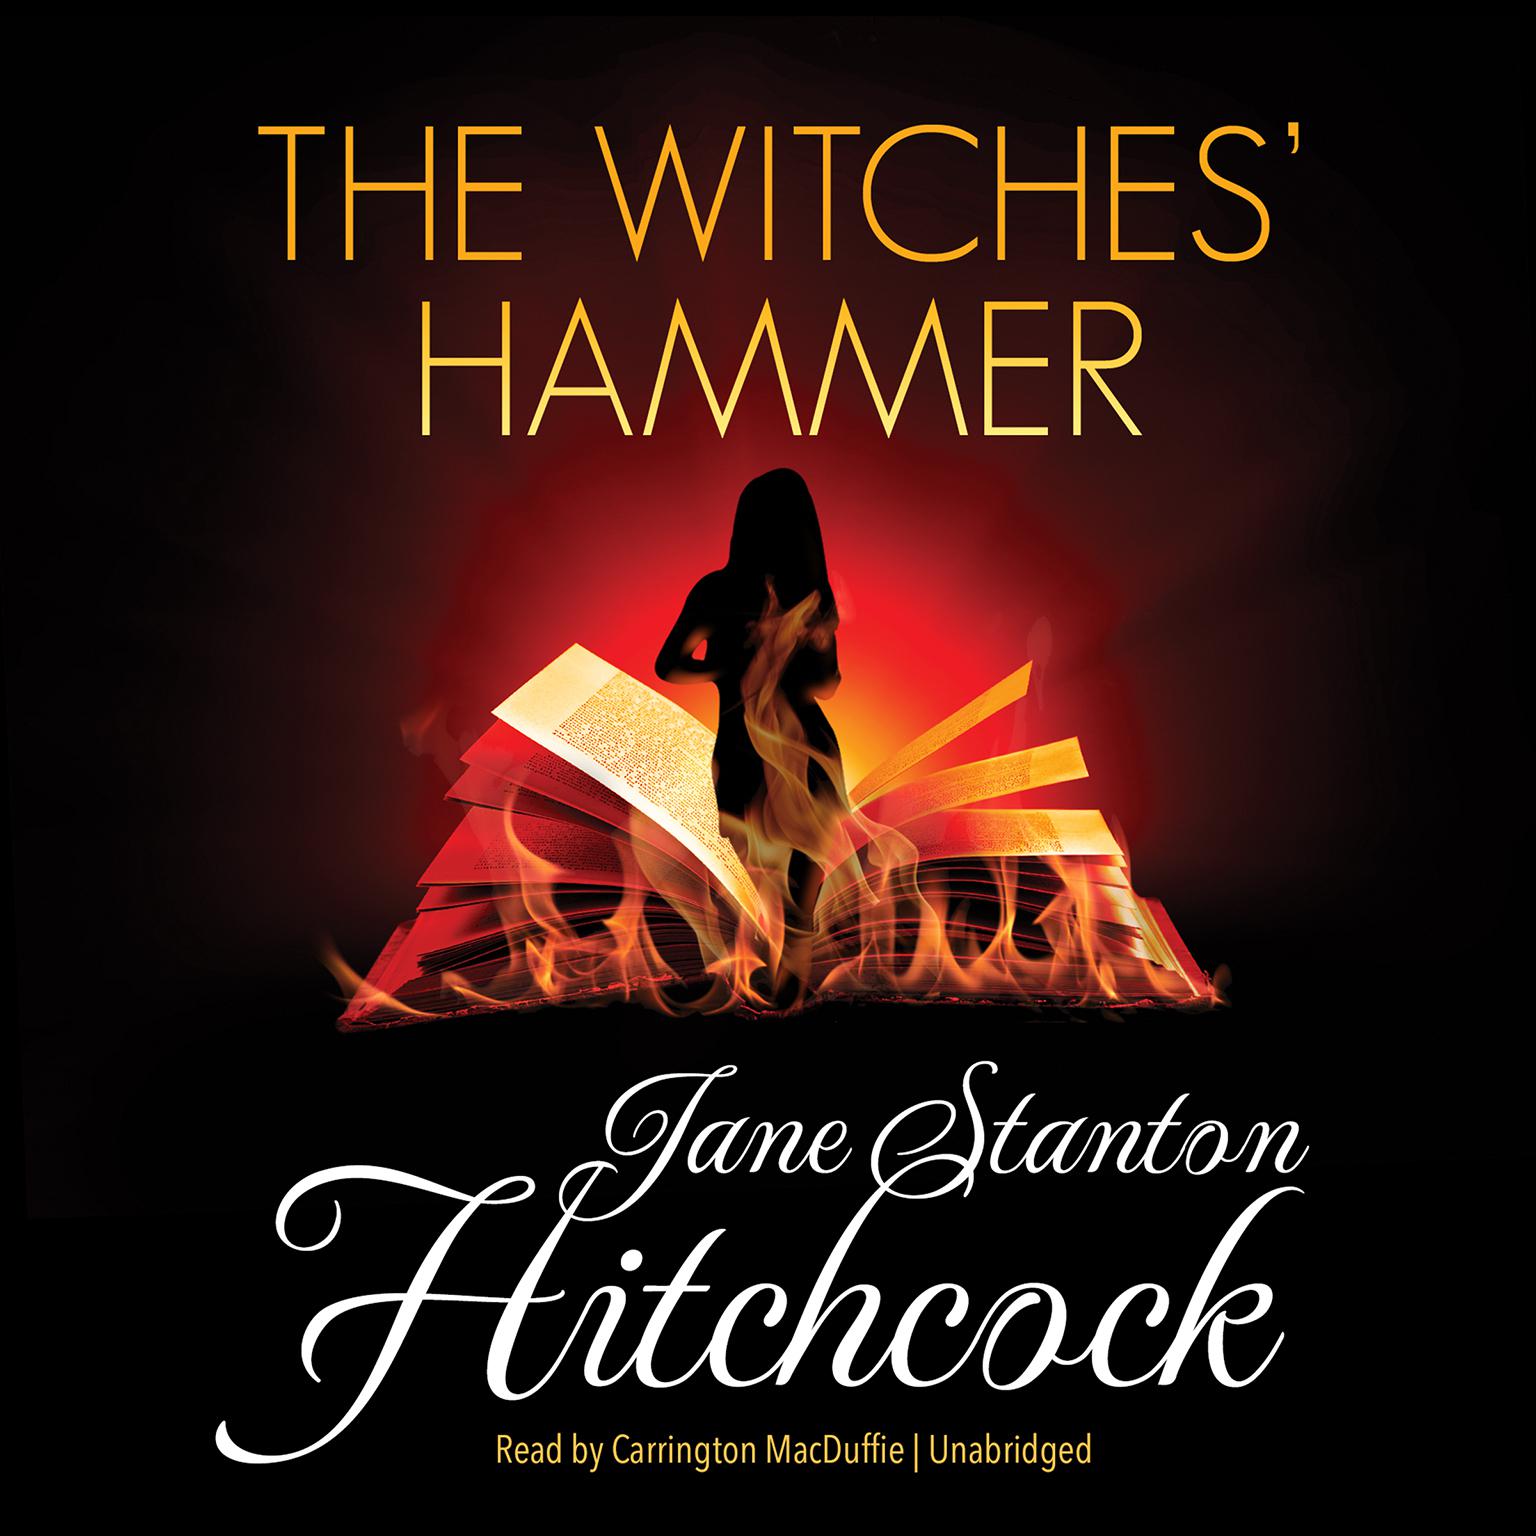 The Witches’ Hammer Audiobook, by Jane Stanton Hitchcock